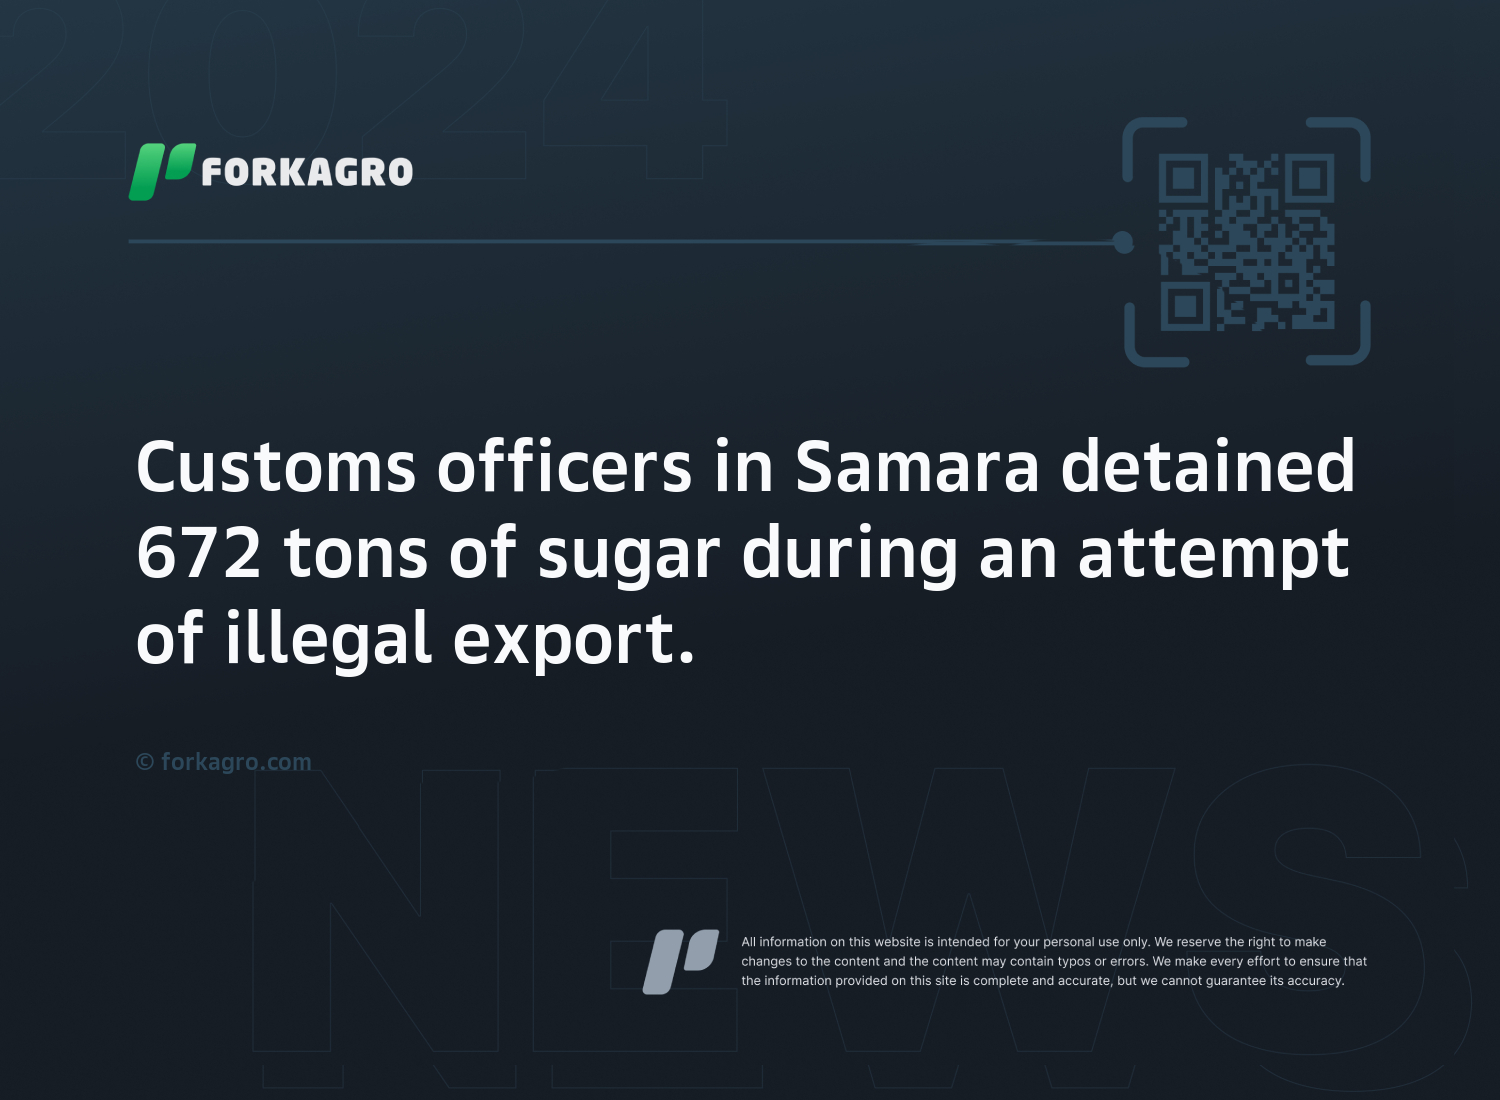 Customs officers in Samara detained 672 tons of sugar during an attempt of illegal export.